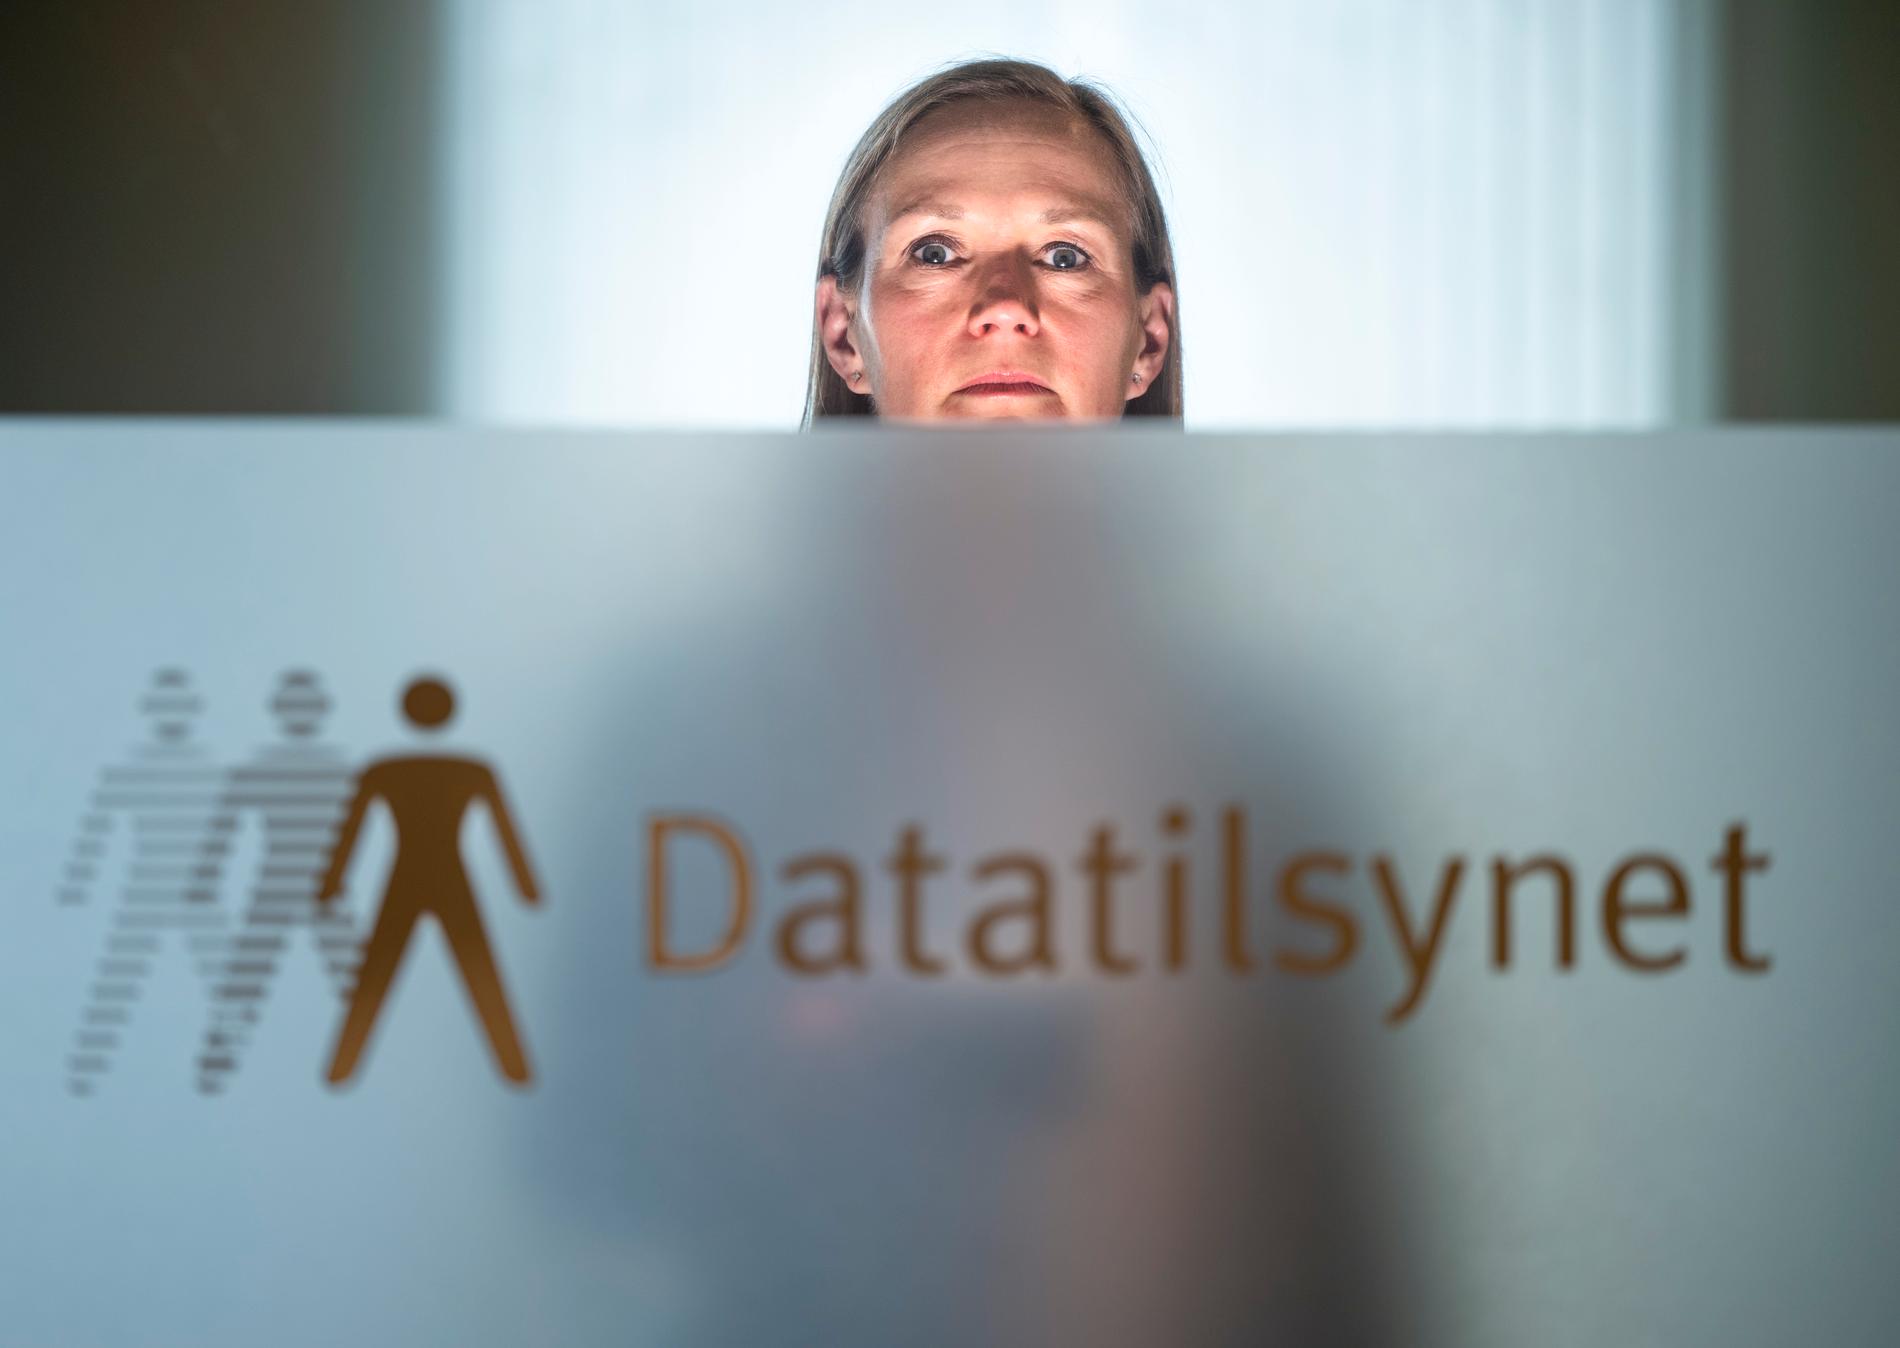 Head of the Norwegian Data Protection Authority for the development of artificial intelligence: – My stomach hurts